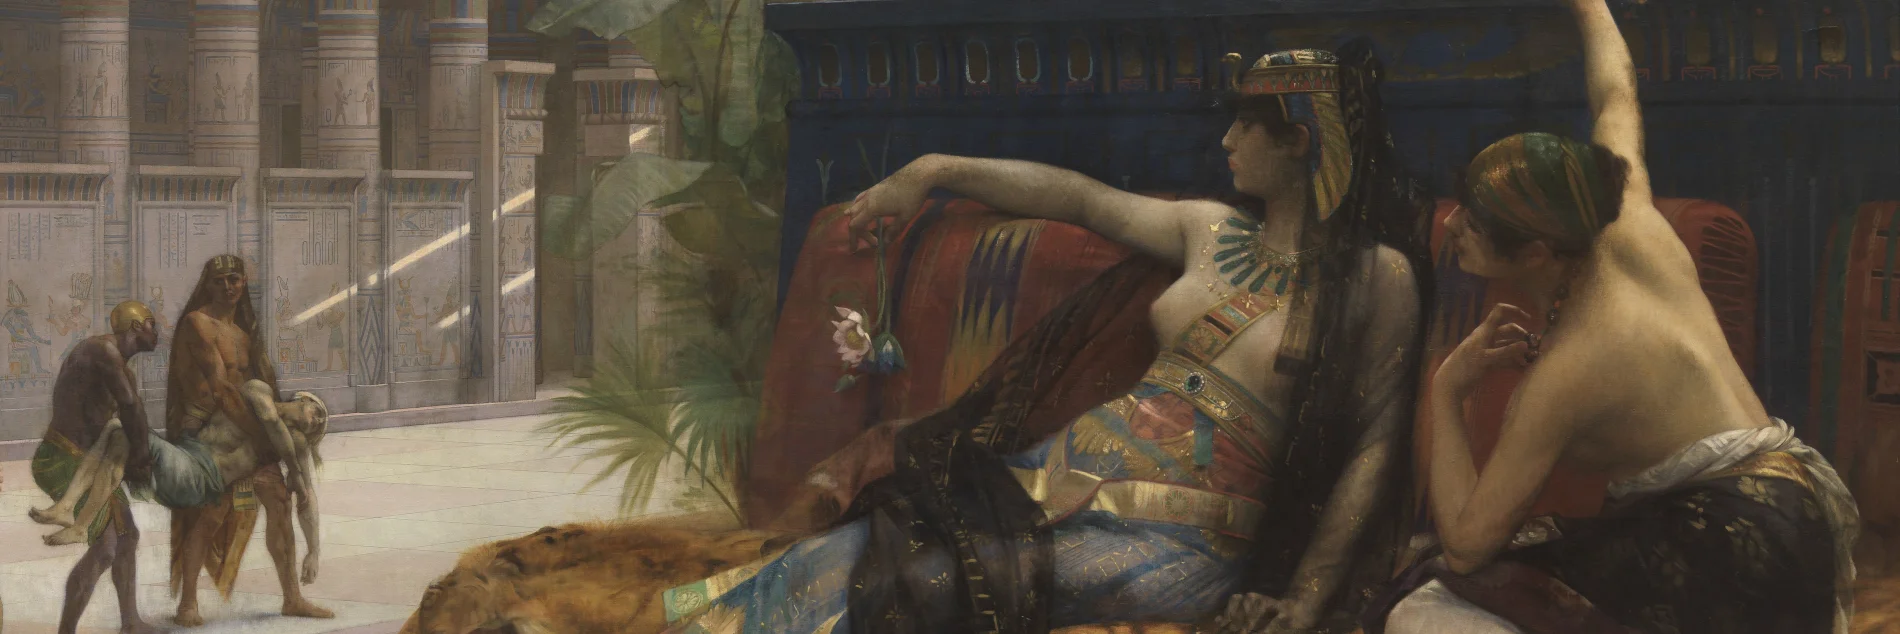 Two women lounging on luxurious furniture in an ancient outdoor setting, featuring grand columns and walls decorated with Egyptian motifs and hieroglyphs. In the background, two men carry a lifeless figure away. One woman holds a lotus flower by her fingertips, while the other leans forward, both looking to the lifeless figure apathetically.